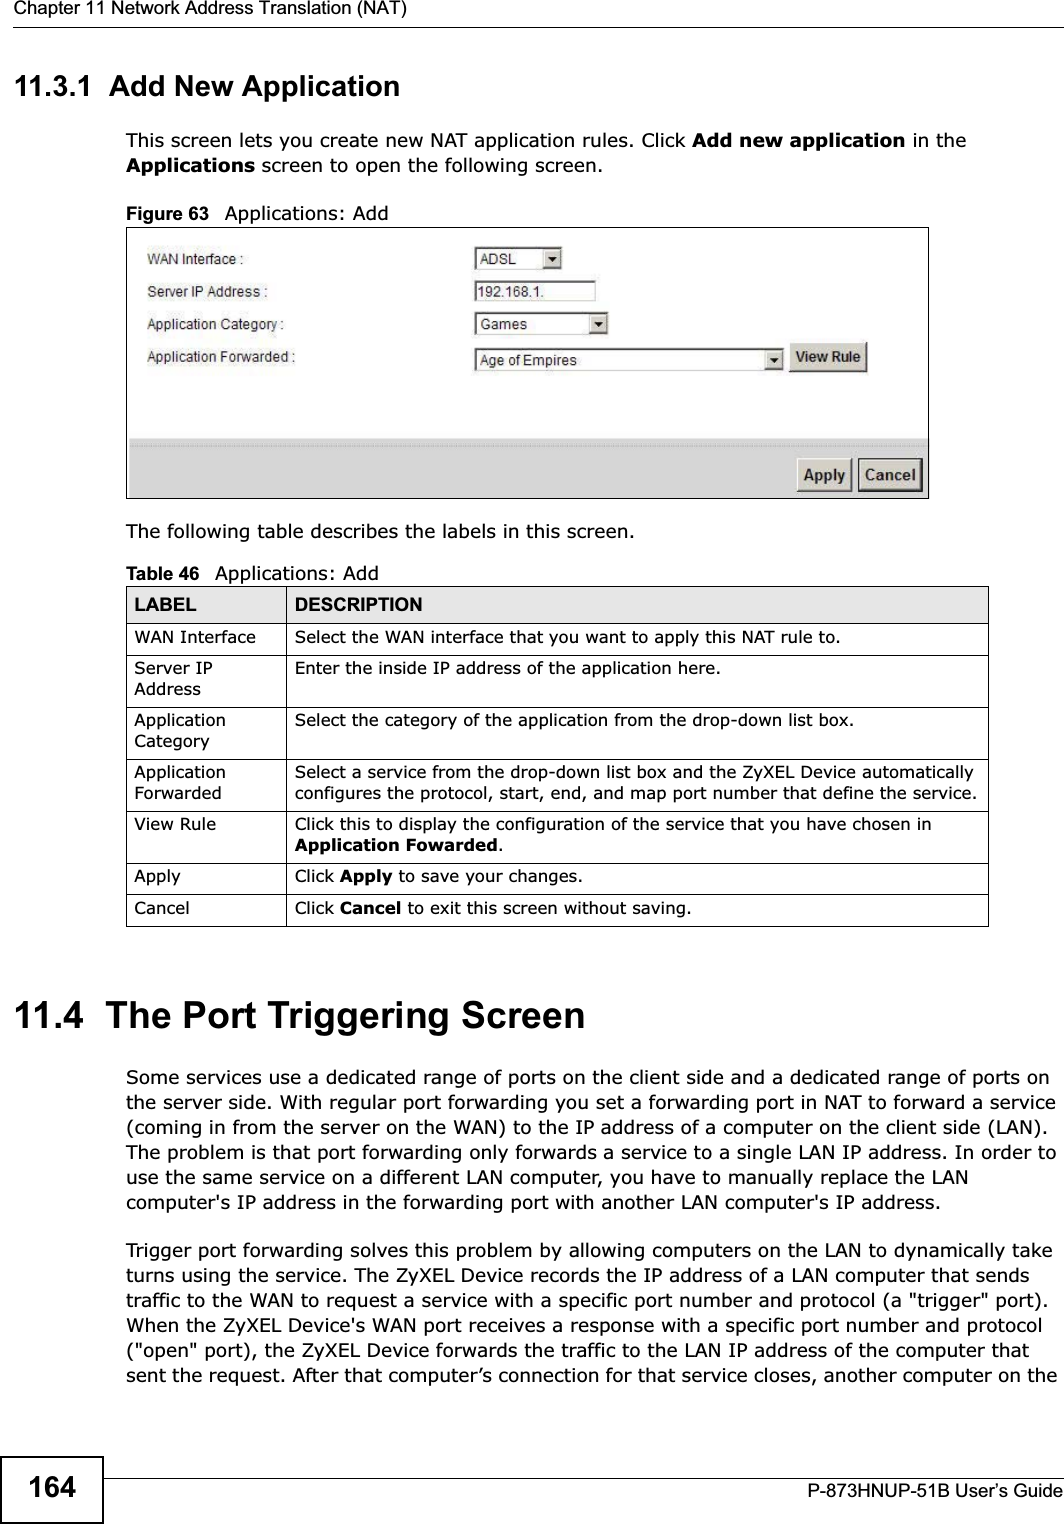 Chapter 11 Network Address Translation (NAT)P-873HNUP-51B User’s Guide16411.3.1  Add New ApplicationThis screen lets you create new NAT application rules. Click Add new application in the Applications screen to open the following screen.Figure 63   Applications: Add The following table describes the labels in this screen. 11.4  The Port Triggering ScreenSome services use a dedicated range of ports on the client side and a dedicated range of ports on the server side. With regular port forwarding you set a forwarding port in NAT to forward a service (coming in from the server on the WAN) to the IP address of a computer on the client side (LAN). The problem is that port forwarding only forwards a service to a single LAN IP address. In order to use the same service on a different LAN computer, you have to manually replace the LAN computer&apos;s IP address in the forwarding port with another LAN computer&apos;s IP address. Trigger port forwarding solves this problem by allowing computers on the LAN to dynamically take turns using the service. The ZyXEL Device records the IP address of a LAN computer that sends traffic to the WAN to request a service with a specific port number and protocol (a &quot;trigger&quot; port). When the ZyXEL Device&apos;s WAN port receives a response with a specific port number and protocol (&quot;open&quot; port), the ZyXEL Device forwards the traffic to the LAN IP address of the computer that sent the request. After that computer’s connection for that service closes, another computer on the Table 46   Applications: AddLABEL DESCRIPTIONWAN Interface Select the WAN interface that you want to apply this NAT rule to.Server IP AddressEnter the inside IP address of the application here.Application CategorySelect the category of the application from the drop-down list box.Application ForwardedSelect a service from the drop-down list box and the ZyXEL Device automatically configures the protocol, start, end, and map port number that define the service.View Rule Click this to display the configuration of the service that you have chosen in Application Fowarded.Apply Click Apply to save your changes.Cancel Click Cancel to exit this screen without saving.